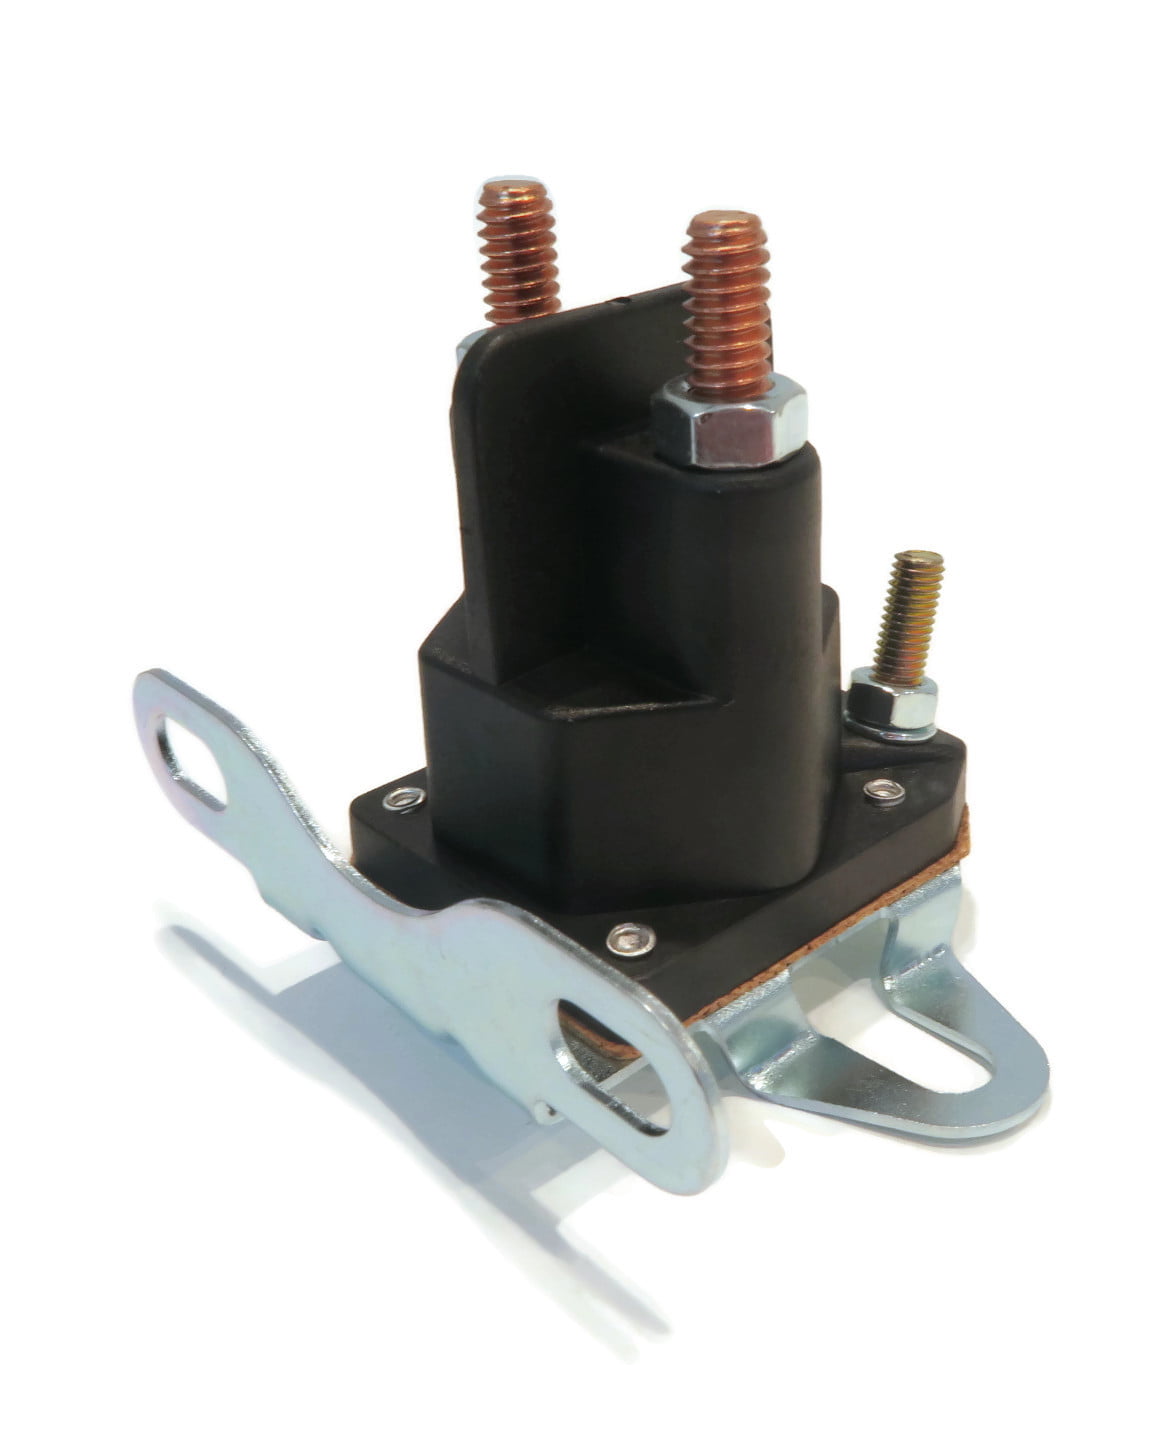 STARTER SOLENOID for Simplicity 1700751 1700751SM 1722739 1657985 1671994 Mowers 